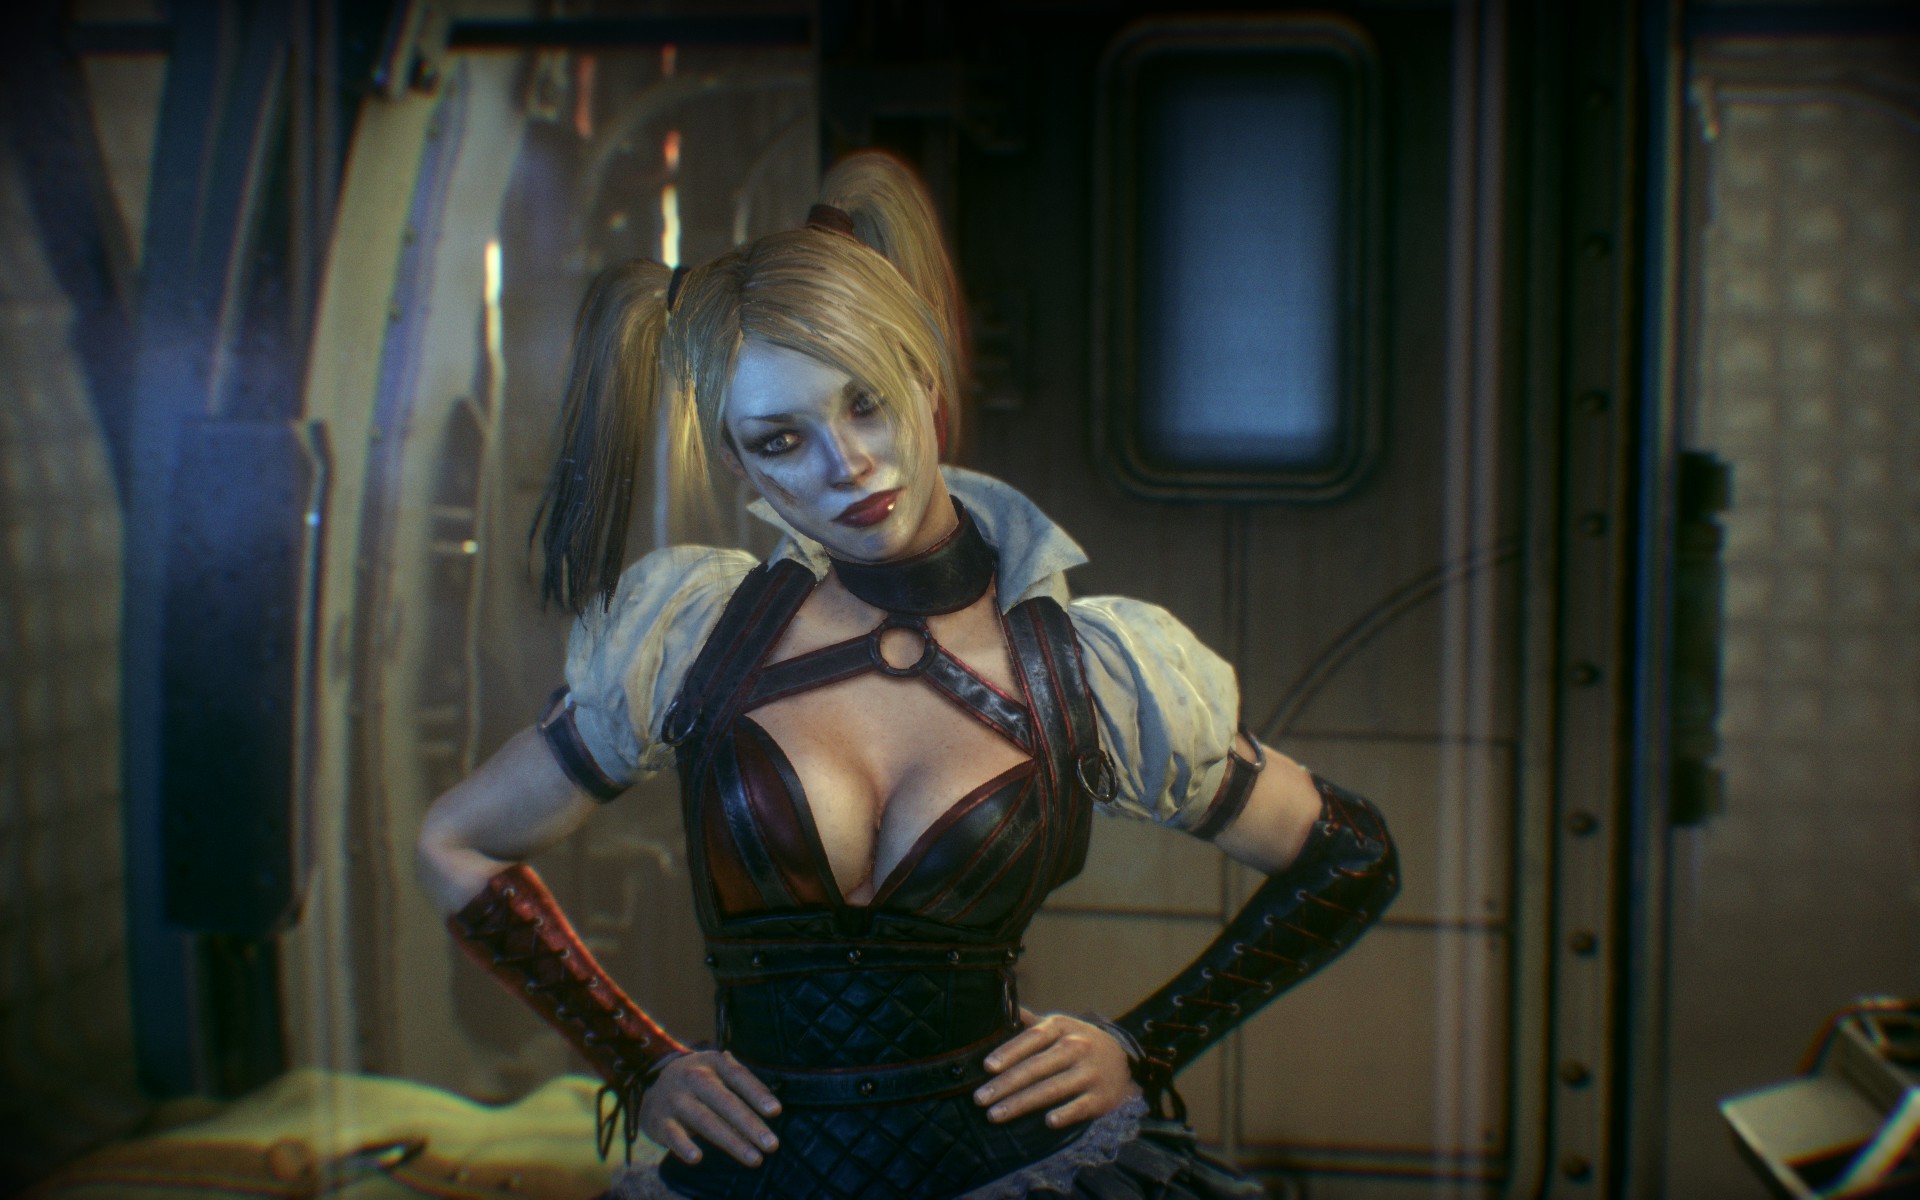 General 1920x1200 Batman: Arkham Knight Harley Quinn video games 2015 (Year) boobs screen shot video game characters video game girls cleavage hands on hips